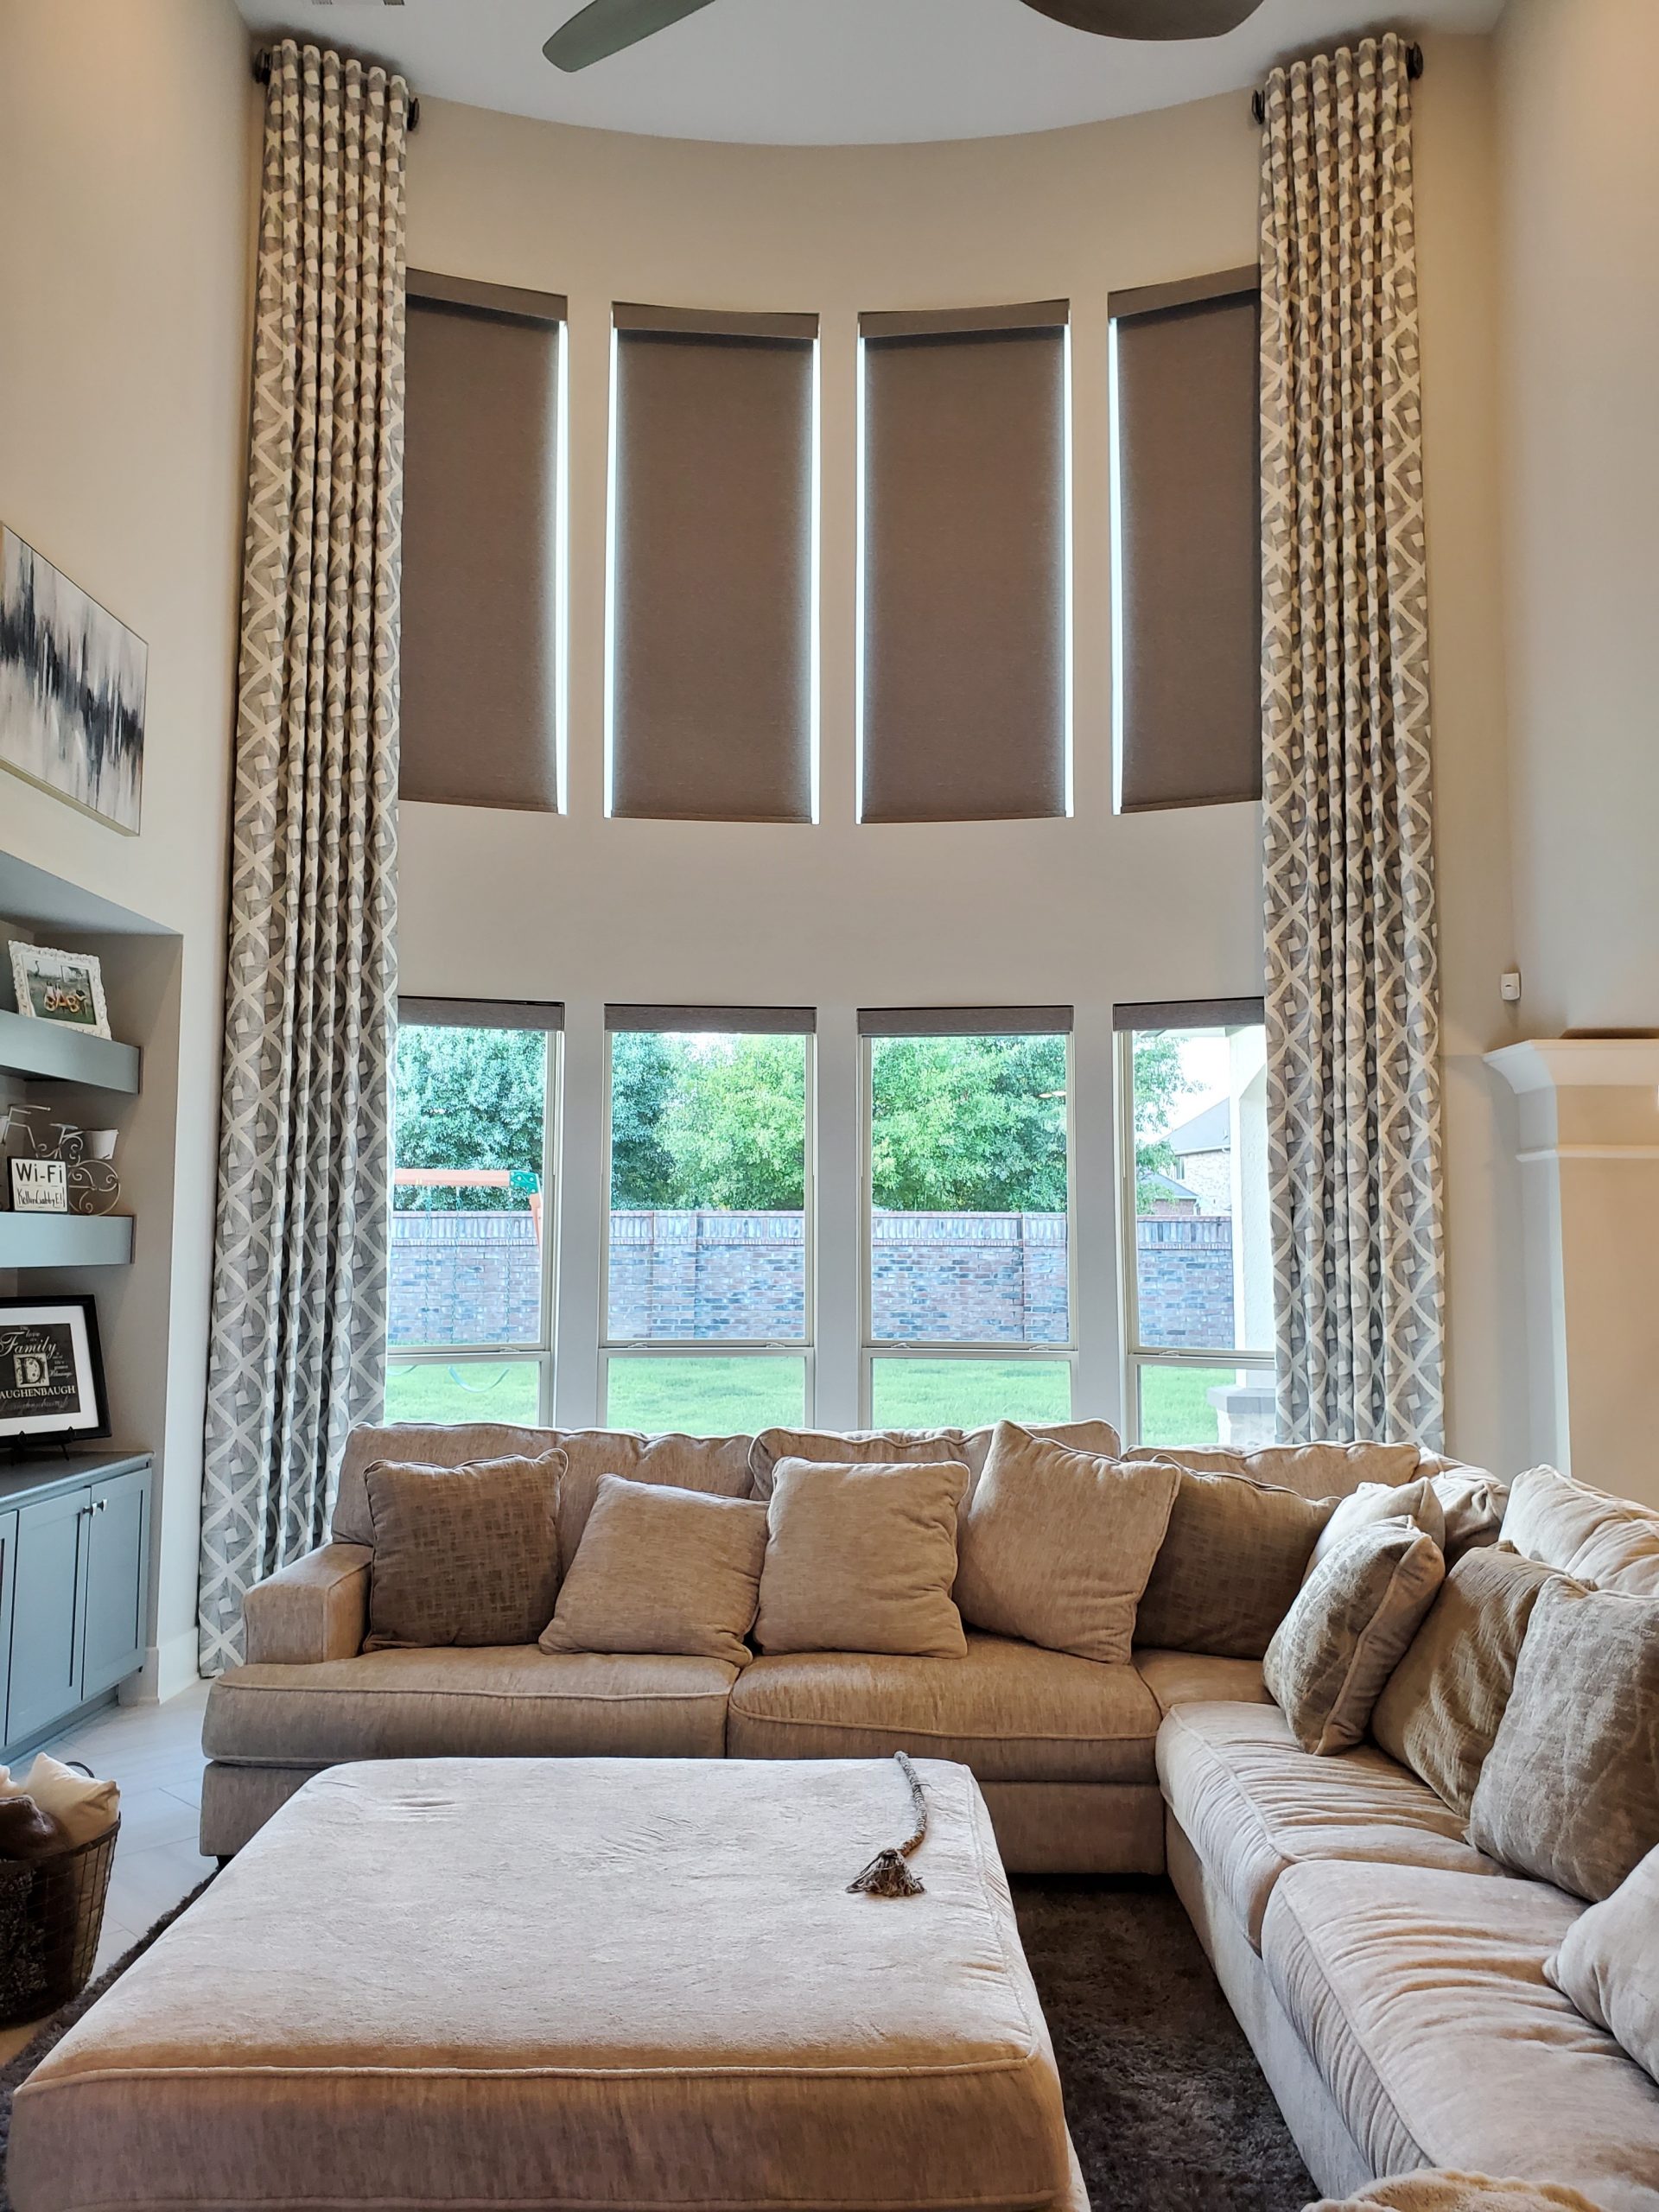 How To Install 2 Story Curtains: A Tall Order! - Huetiful Homes